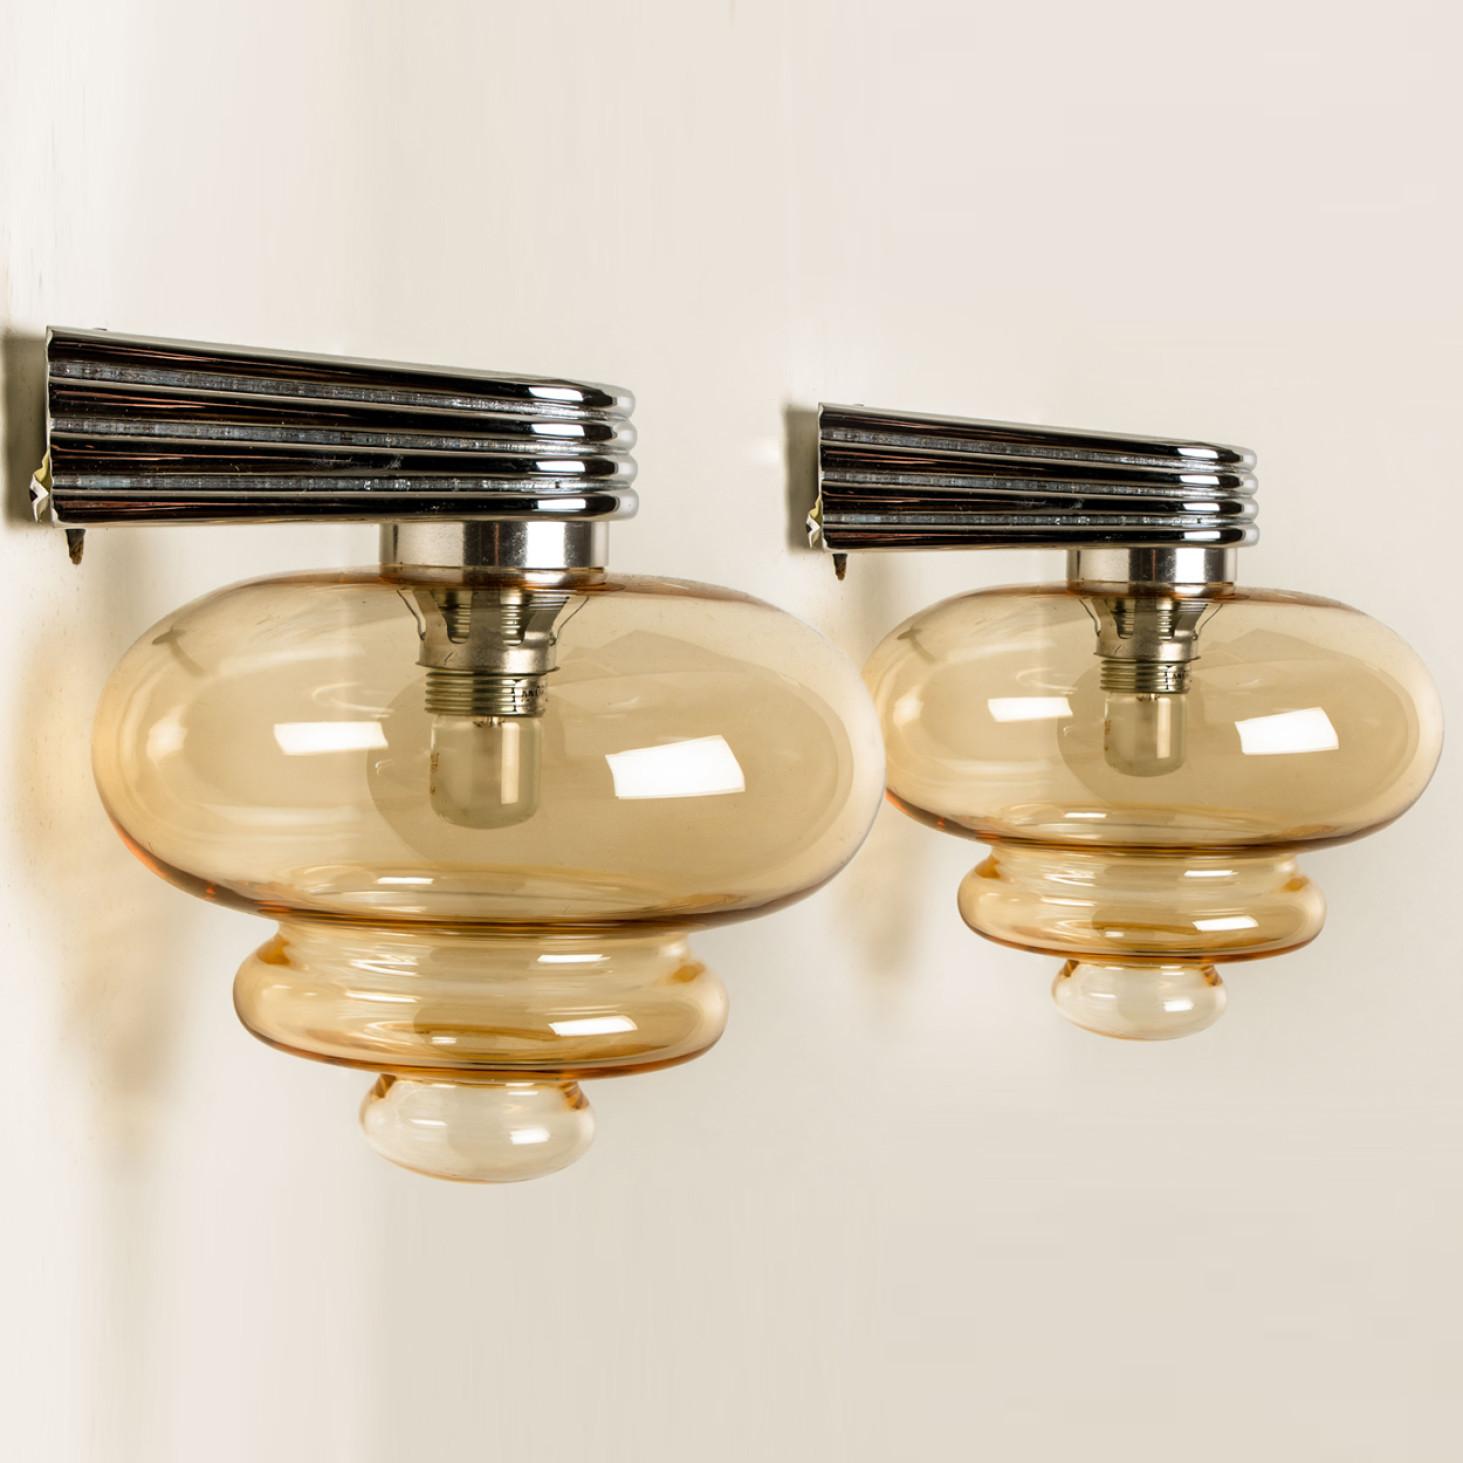 A pair of amber glass wall lights, made around 1970s. With a chrome fixture and 3 spheres shaped glass.
The beautiful clear glass gives a nice diffuse light effect on ceiling, walls and floor.

In very good vintage condition. Cleaned well wired